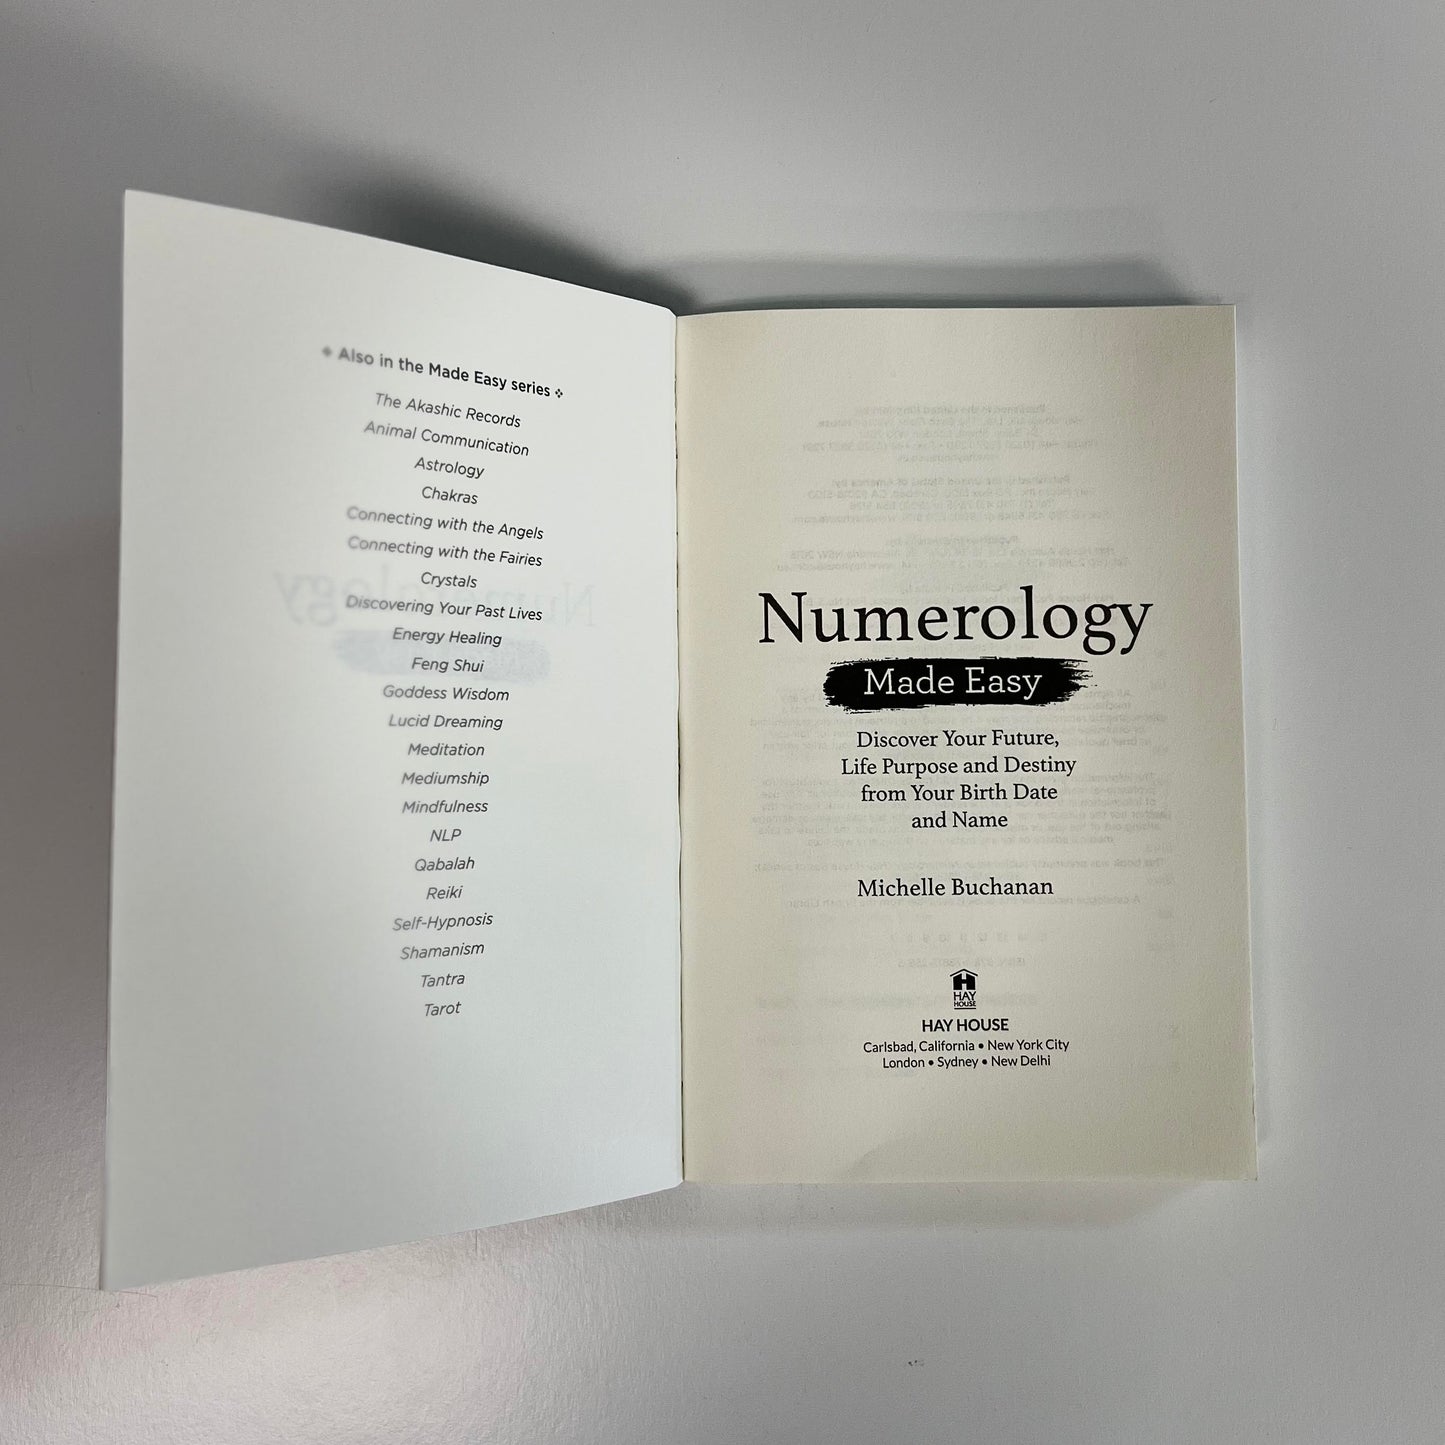 Numerology Made Easy by Michelle Buchanan